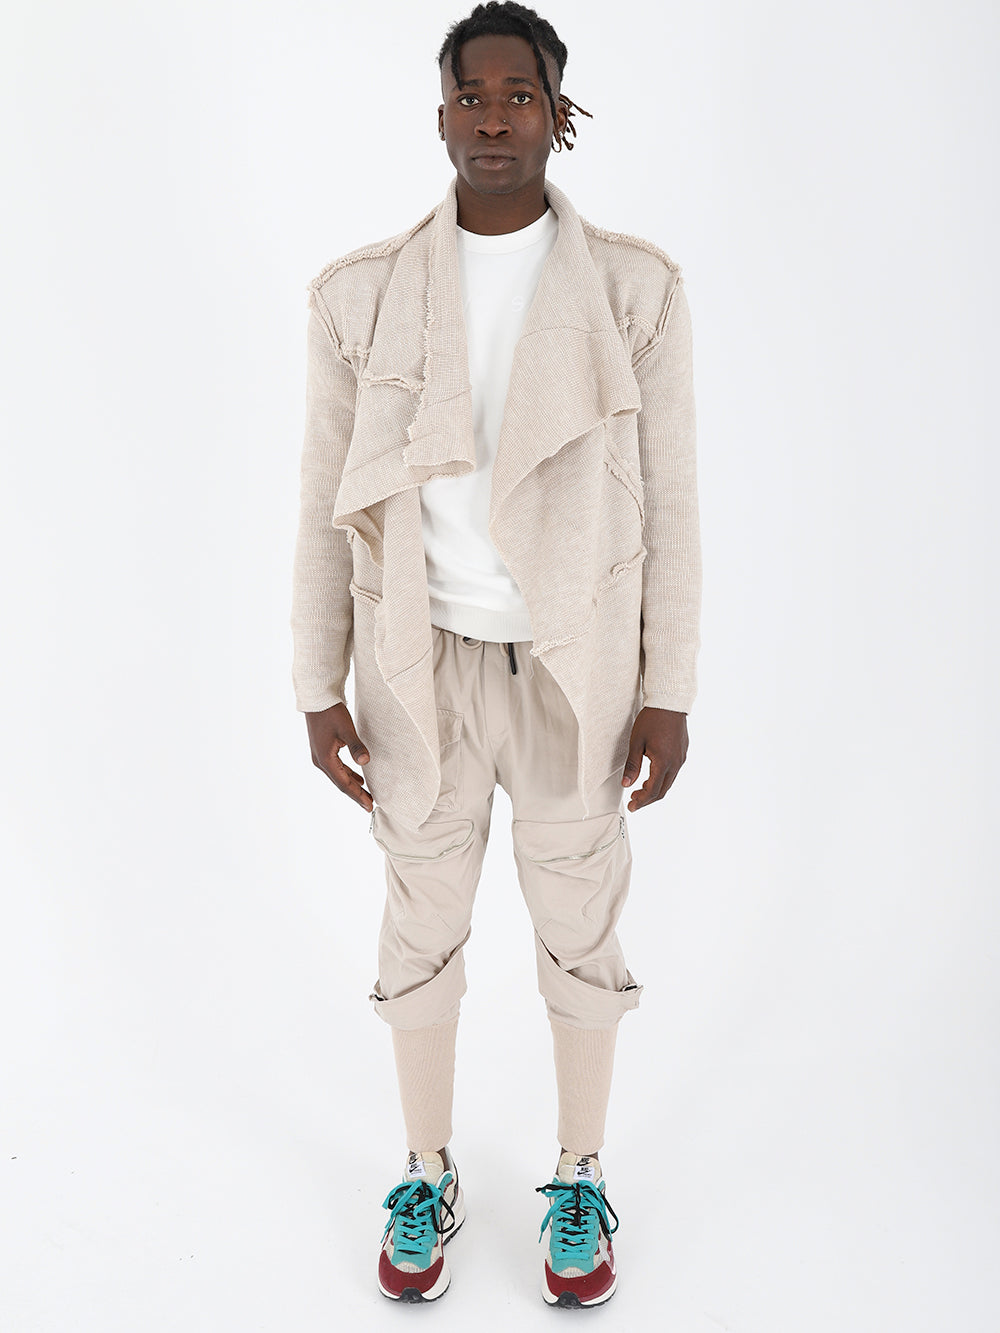 A man wearing the ASYMMETRIC SHORT CARDIGAN // IVORY jacket and sneakers.